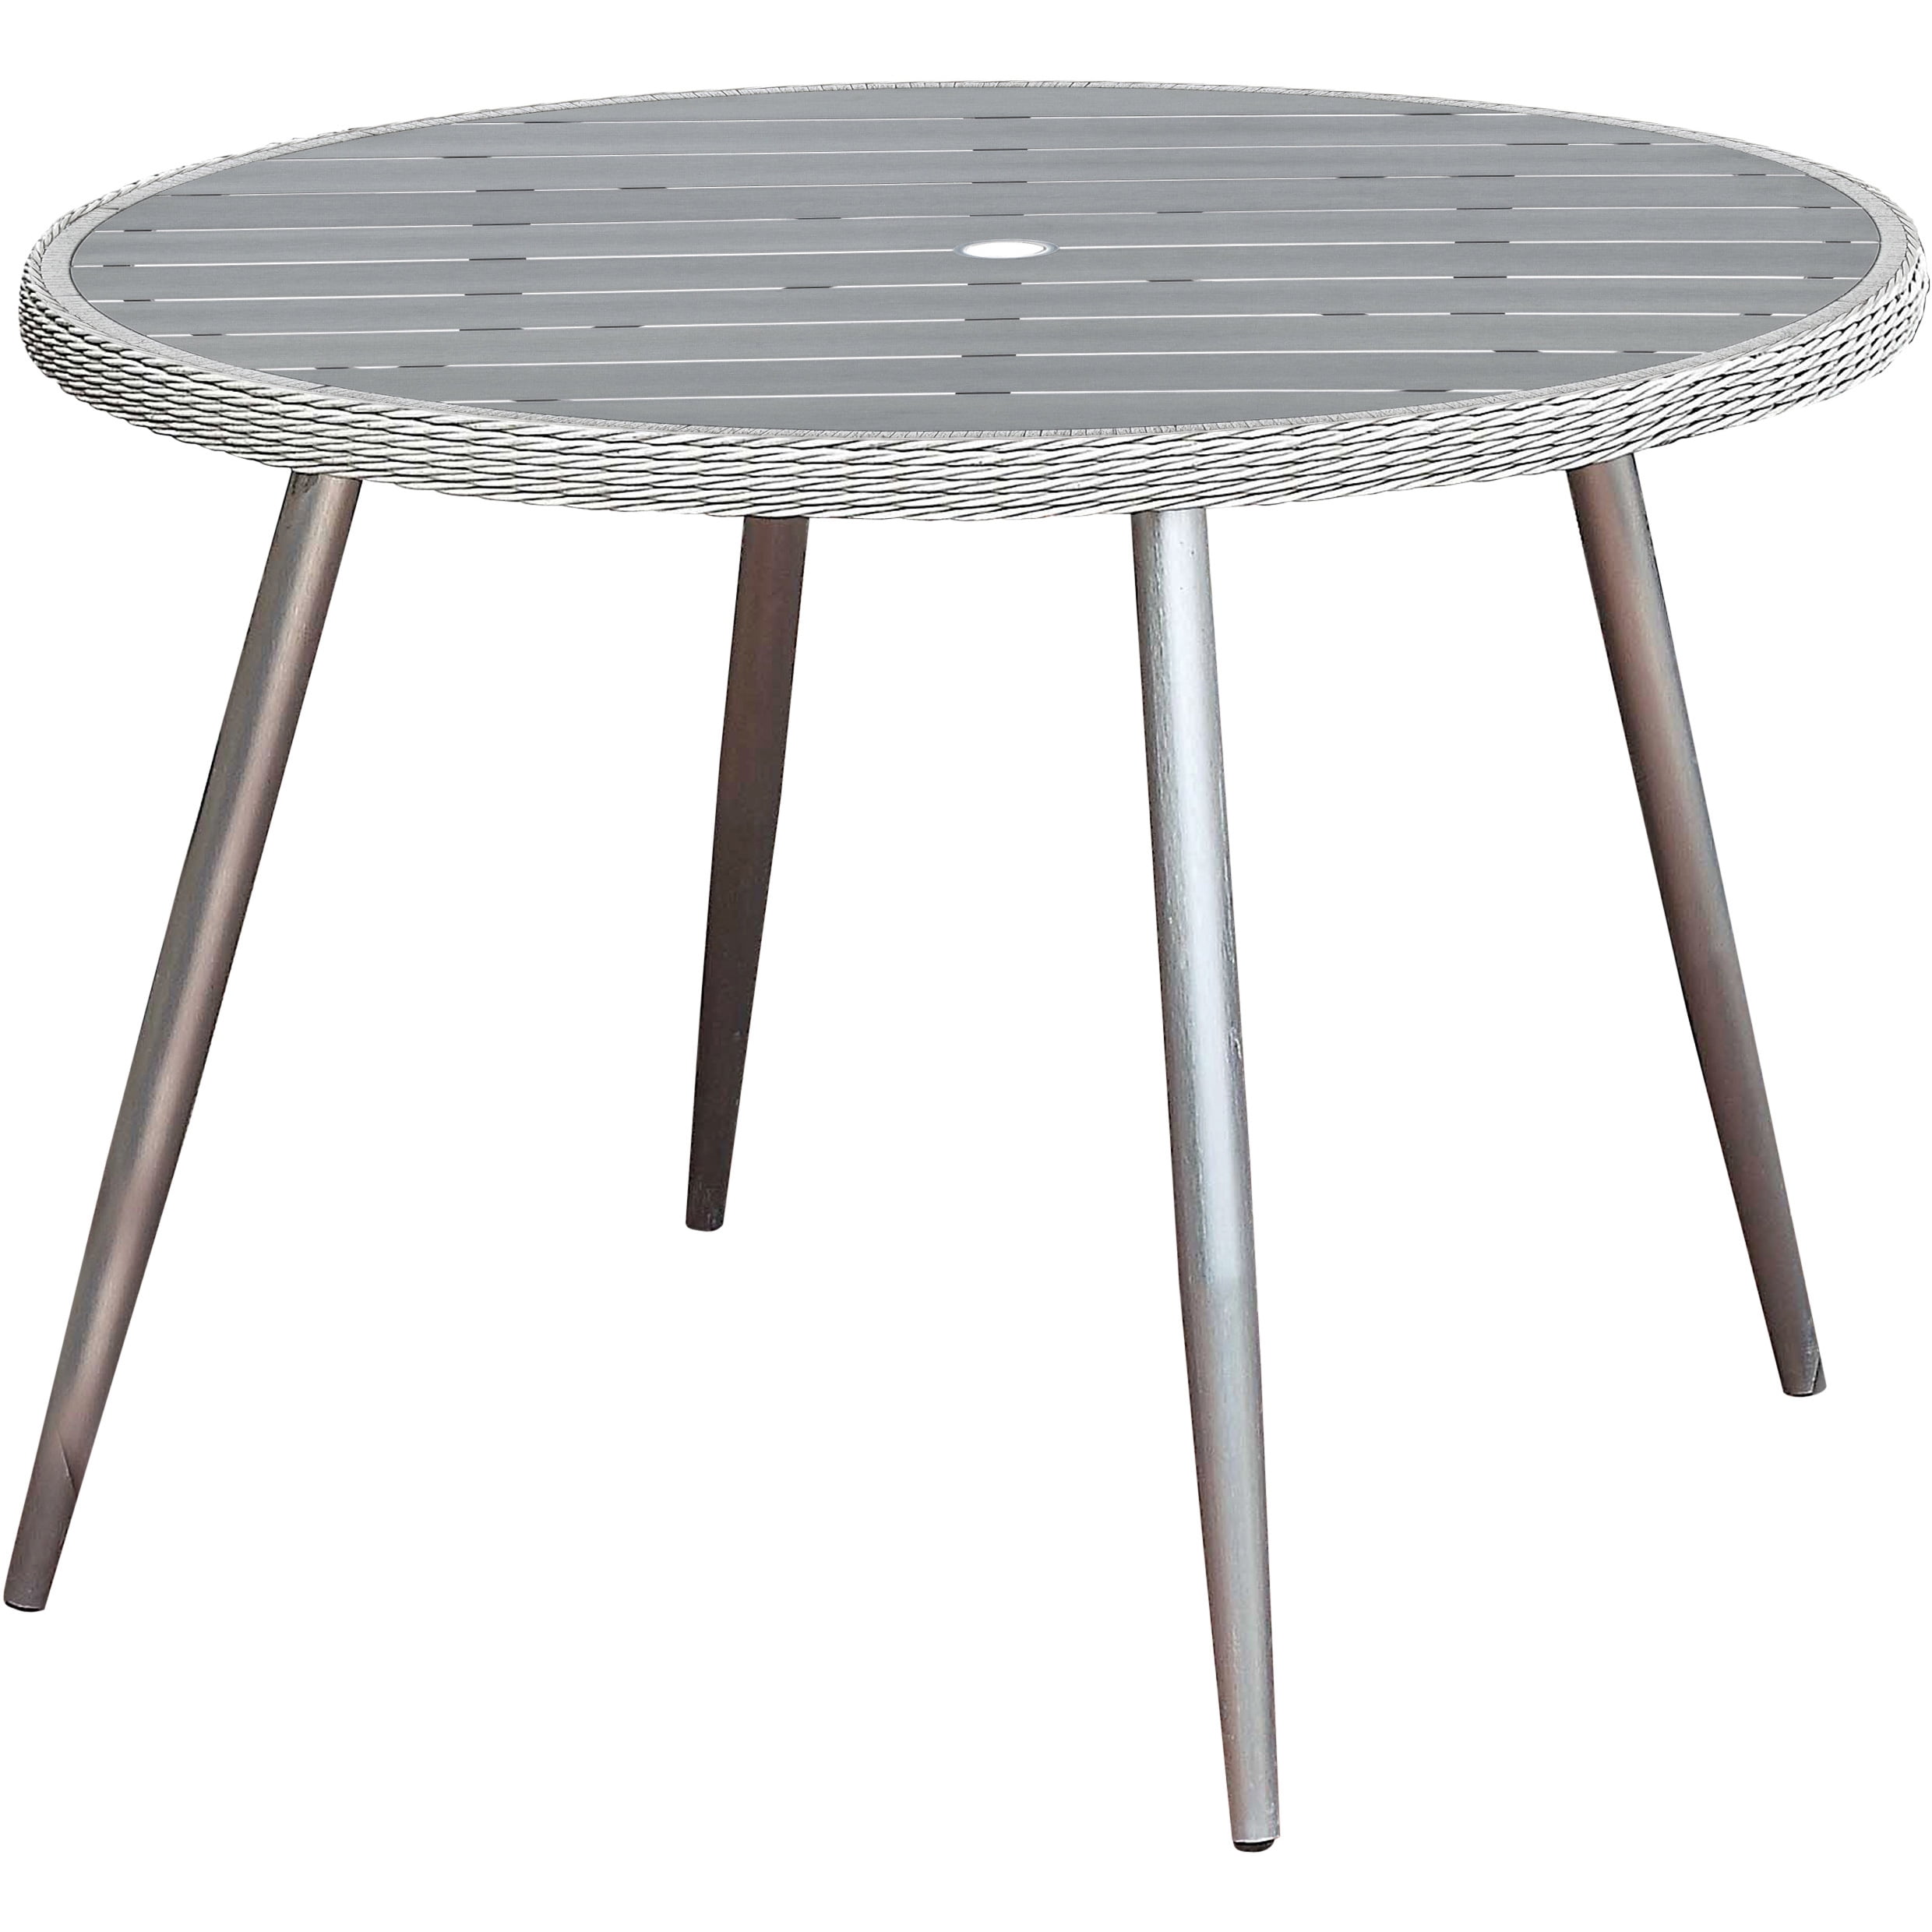 Furniture of America Ellyn Modern Round Patio Dining Table, Gray